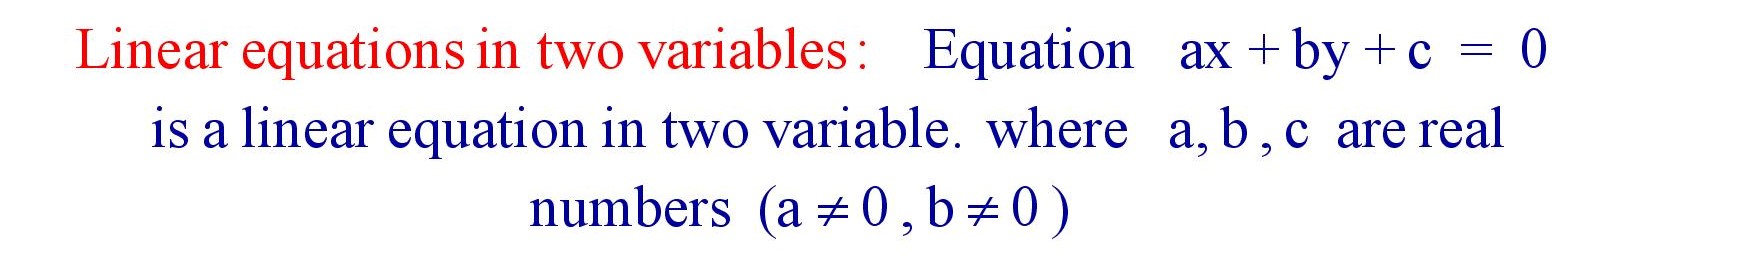 Linear equation in two variables Definition